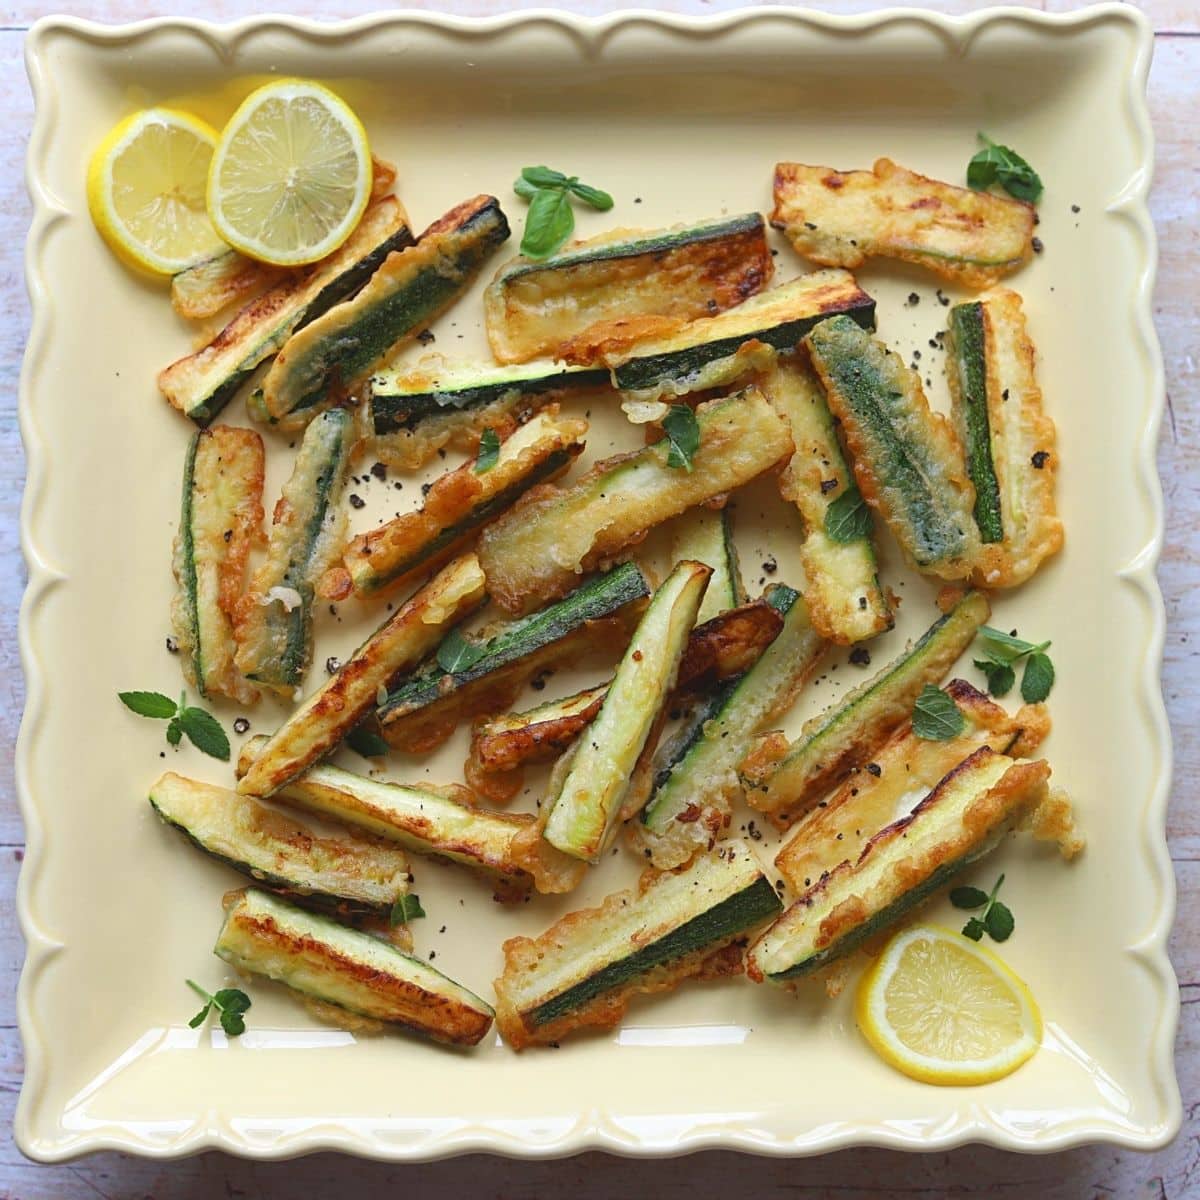 Fried zucchini chips on a large yellow platter with sliced lemon and fresh mint.